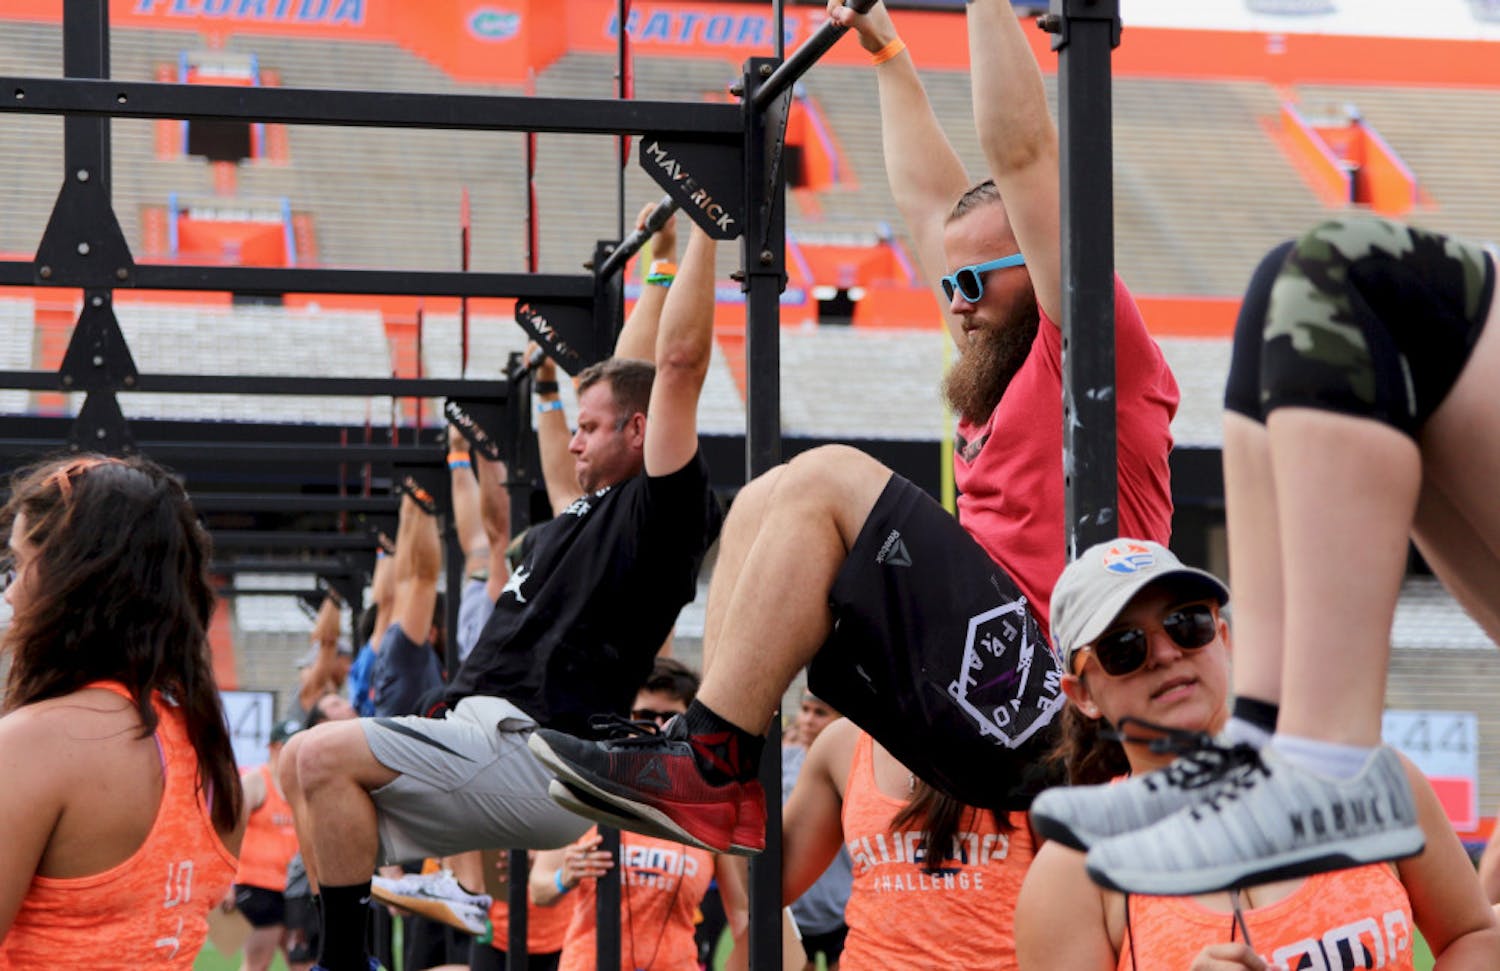 The 2018 Swamp Challenge, which celebrated its eighth year this past weekend, is the only CrossFit-style event to take place on an SEC field, according to their website. Hundreds of athletes participated in cardio, bodyweight and obstacle workouts at the one day event across three classes, Male/Male, Female/Female and co-ed, and three divisions, Masters, Scaled and RX.